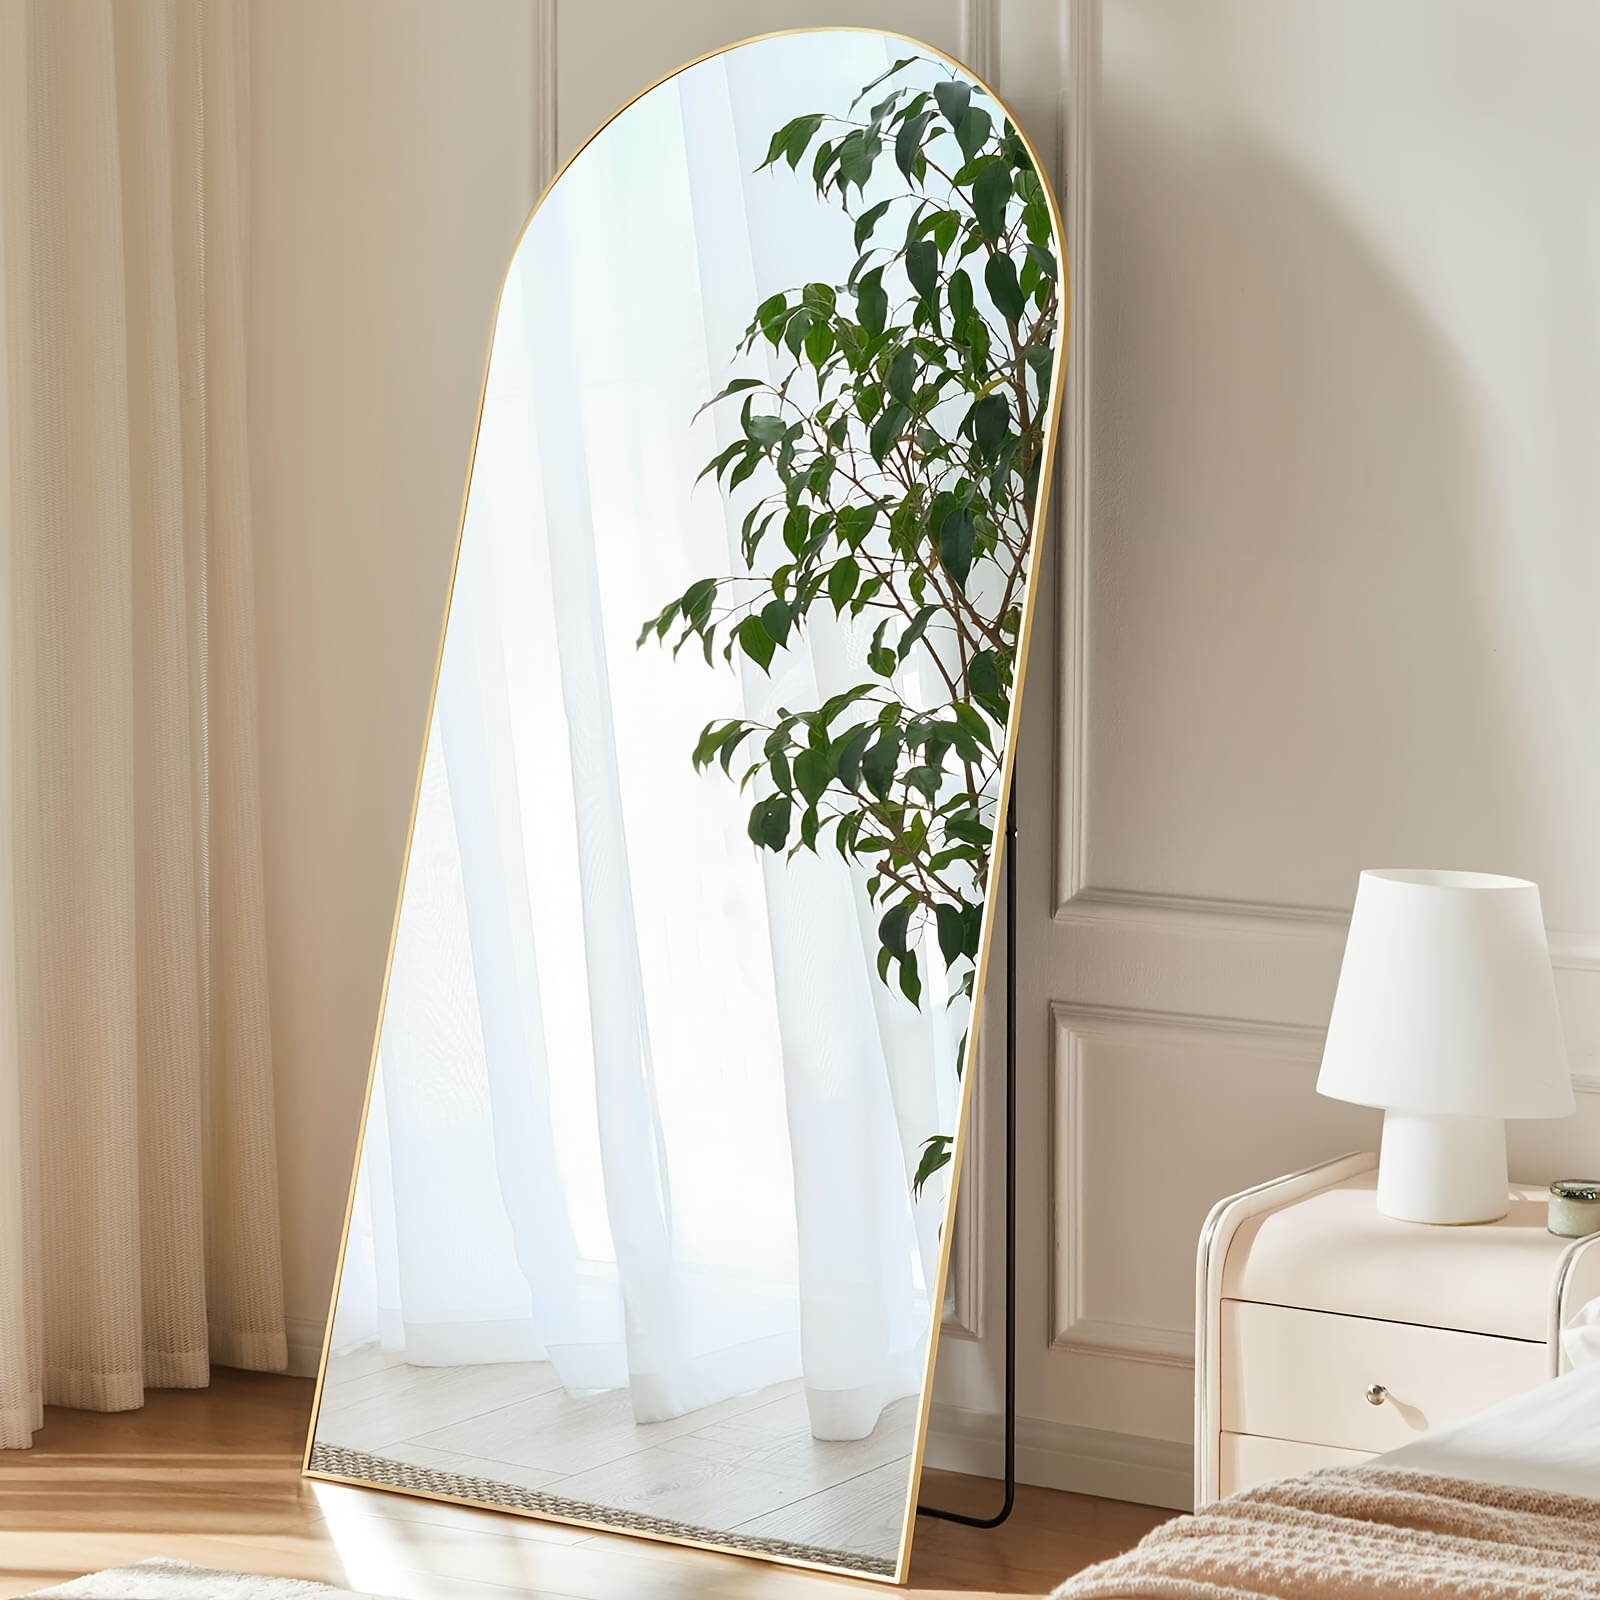 

1pc Full Length Mirror, Floor Standing Mirror, Hanging Or Leaning Against Wall Mirror With Stand, Aluminum Alloy Frame Makeup Mirror For Living Room Bedroom Cloakroom Decor